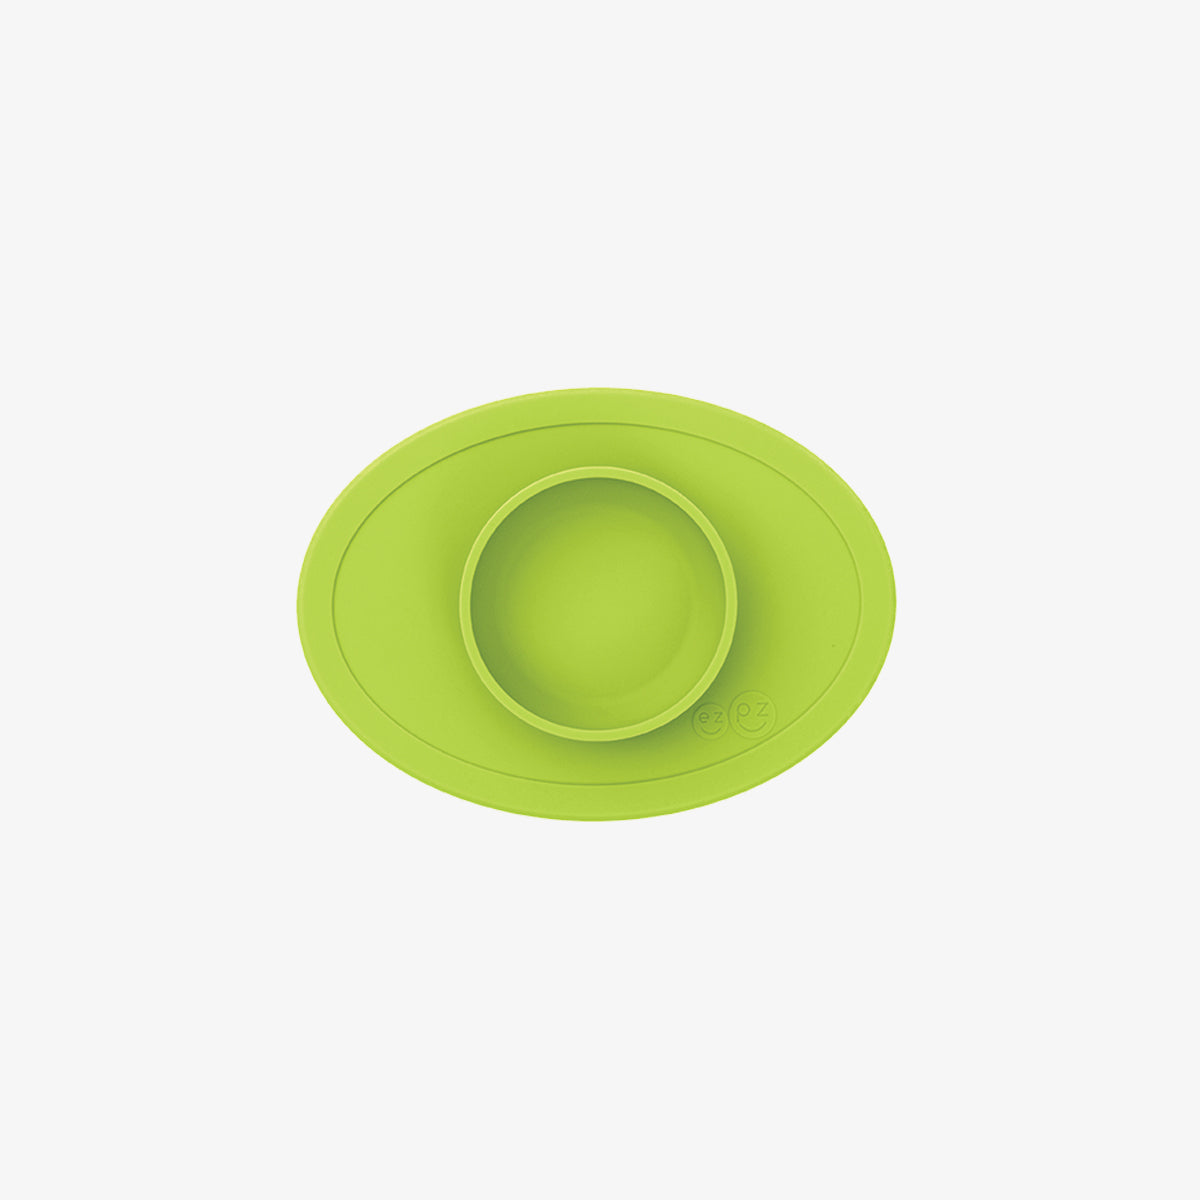 The Tiny Bowl in Lime by ezpz / Silicone Bowl for Babies that Fits on High Chairs